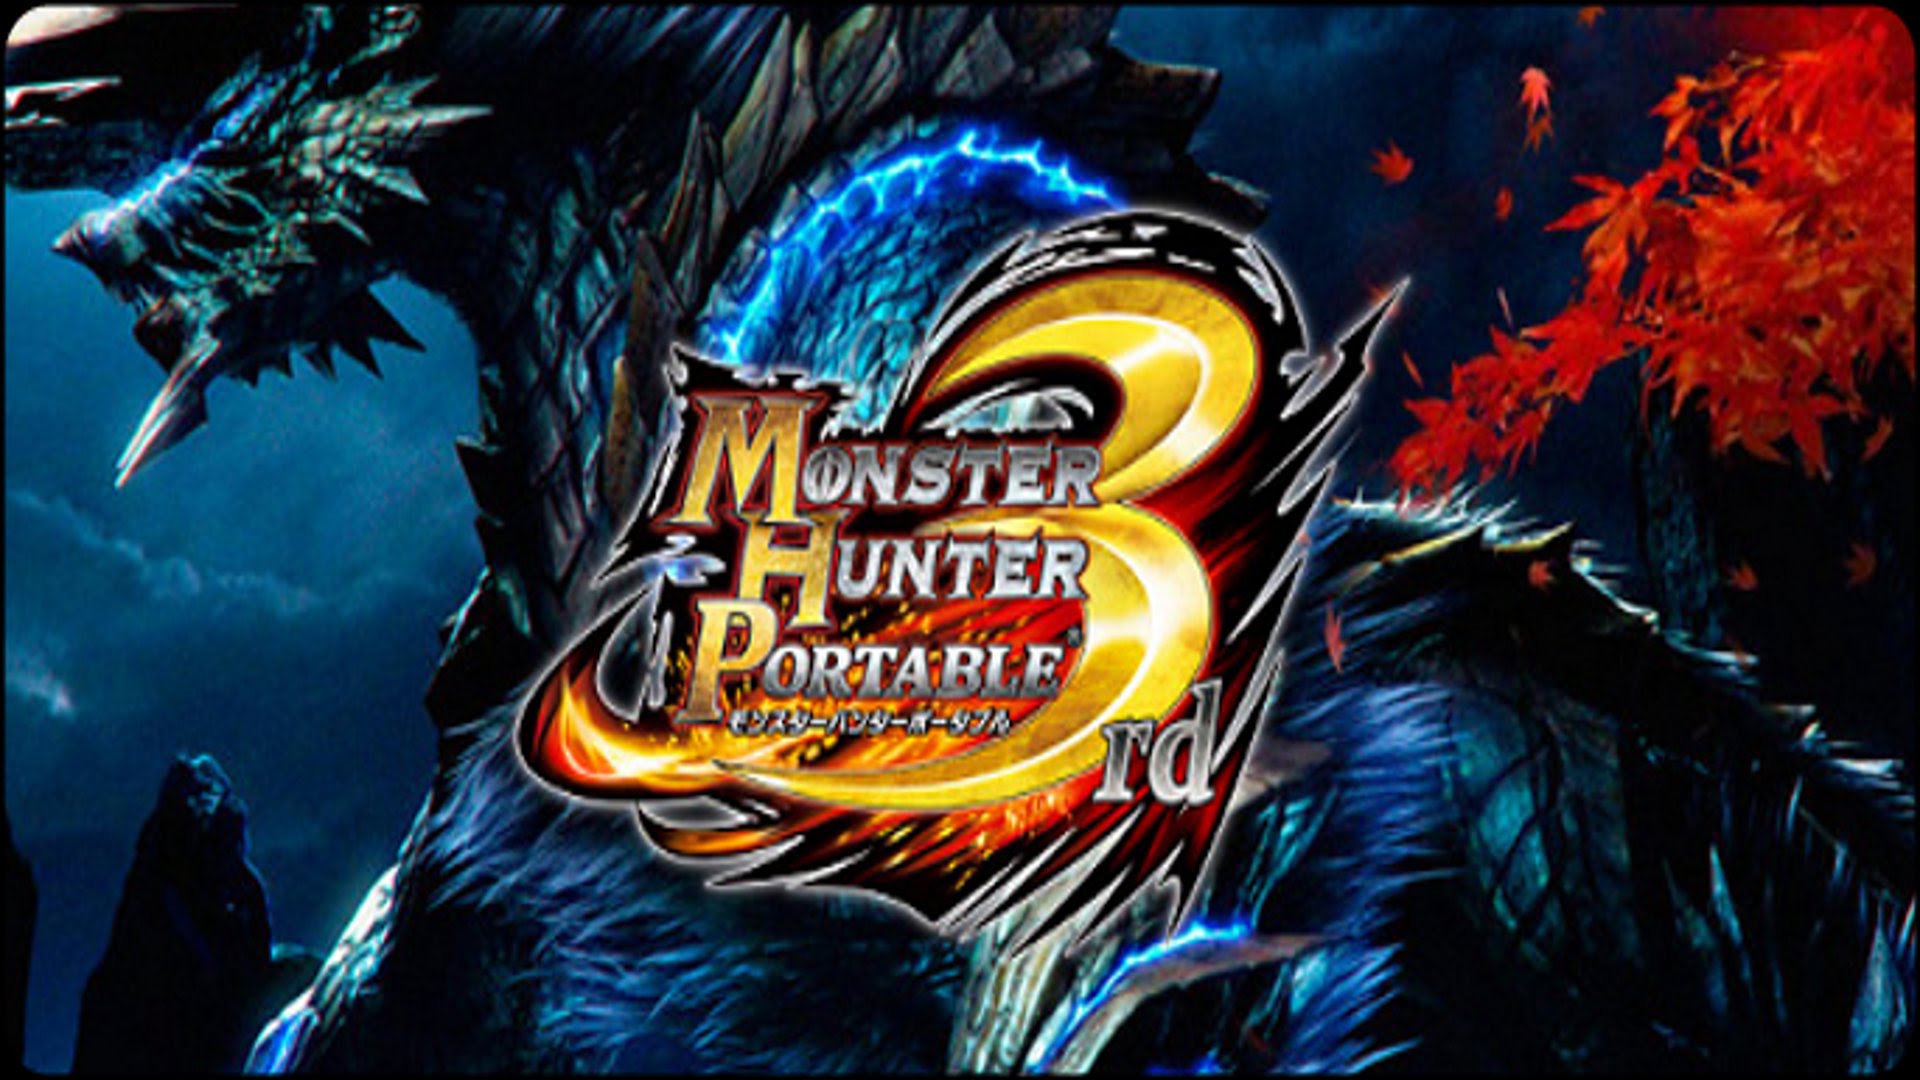 monster hunter portable 3rd hd english patched download